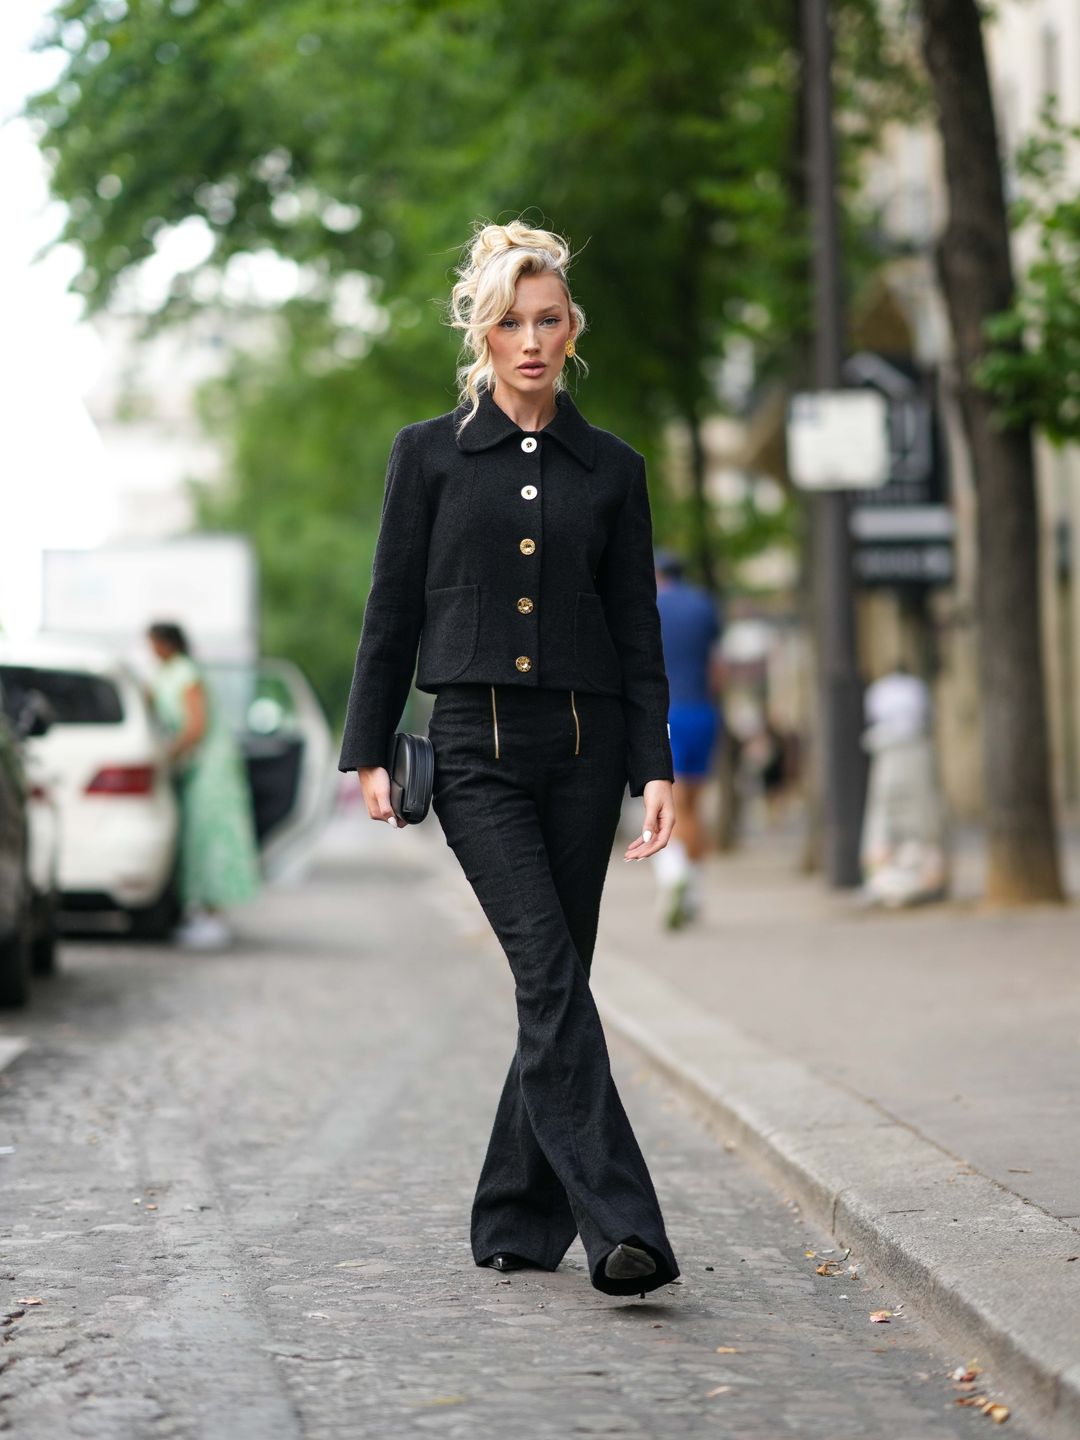 A guest wore a vintage-feel boxy jacked with high-waisted trousers and heels.